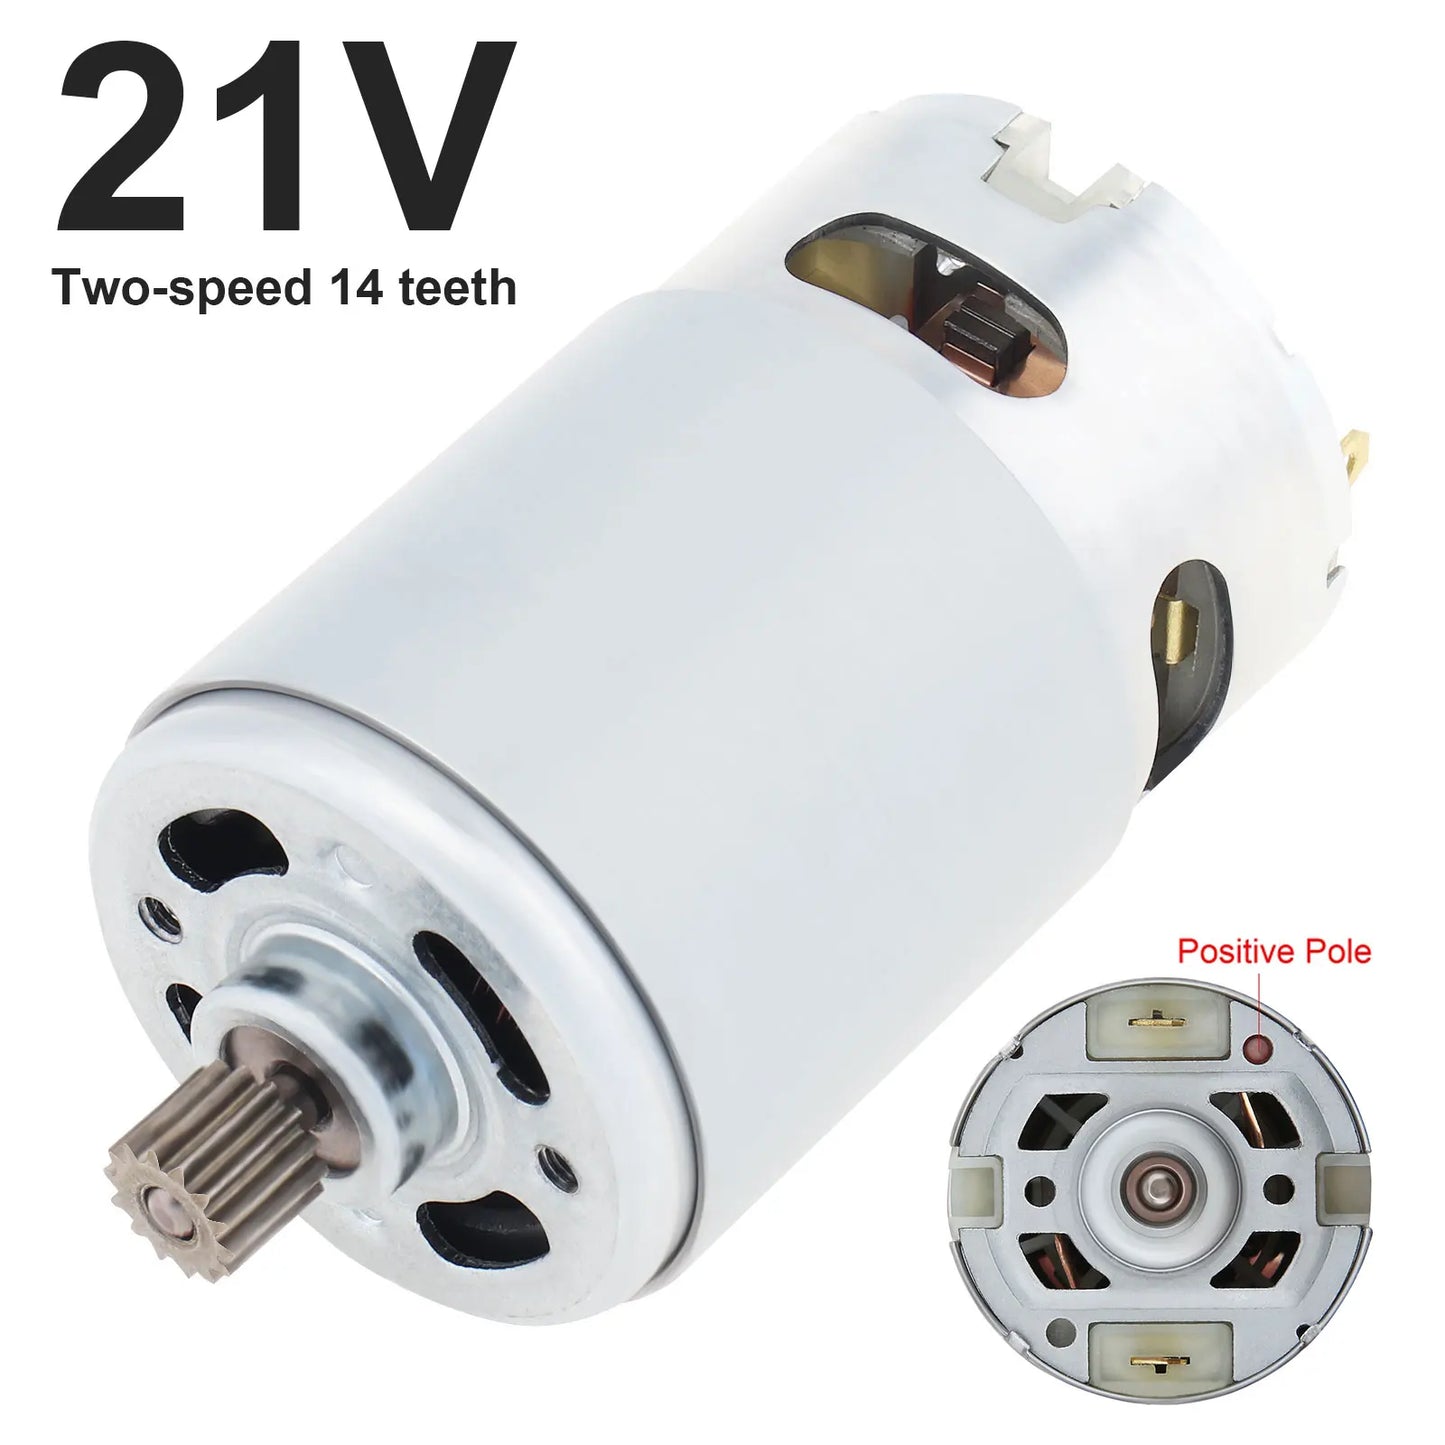 RS550 DC Motor 21V 25000RPM Lithium Electric Saw Motor with 14 Teeth Diameter 8.2mm Gear